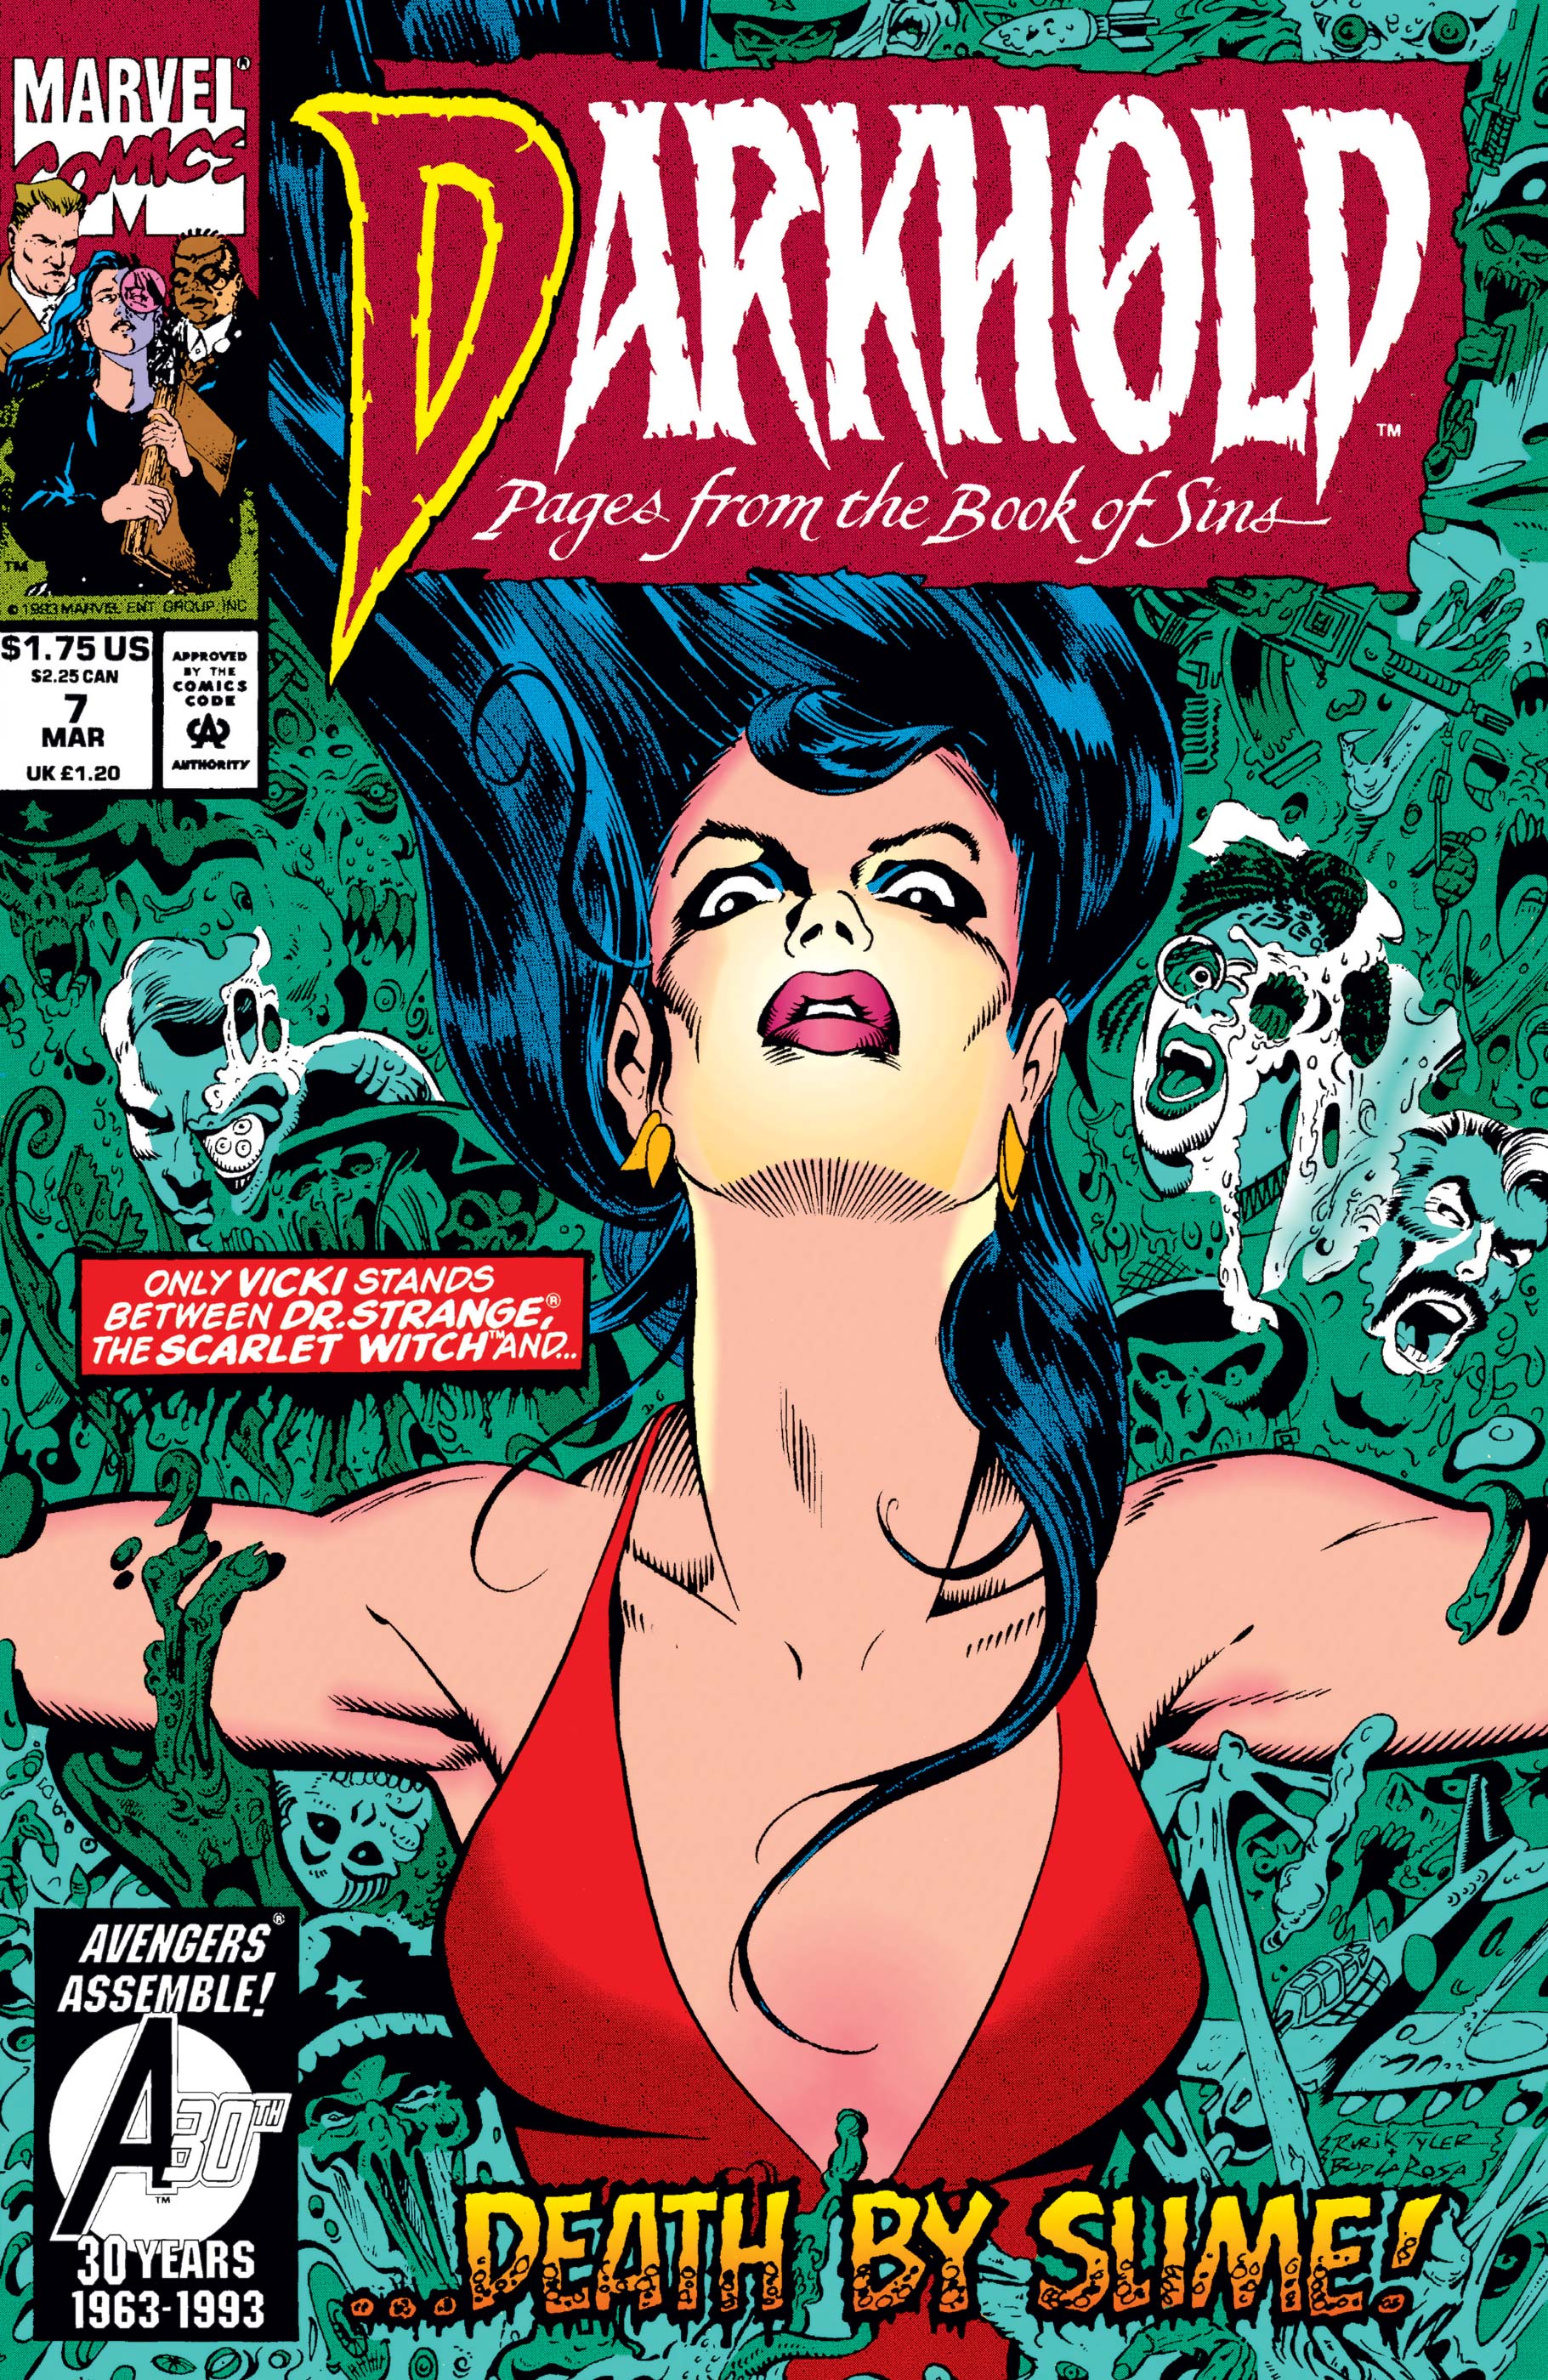 Darkhold: Pages from the Book of Sins (1992) #7